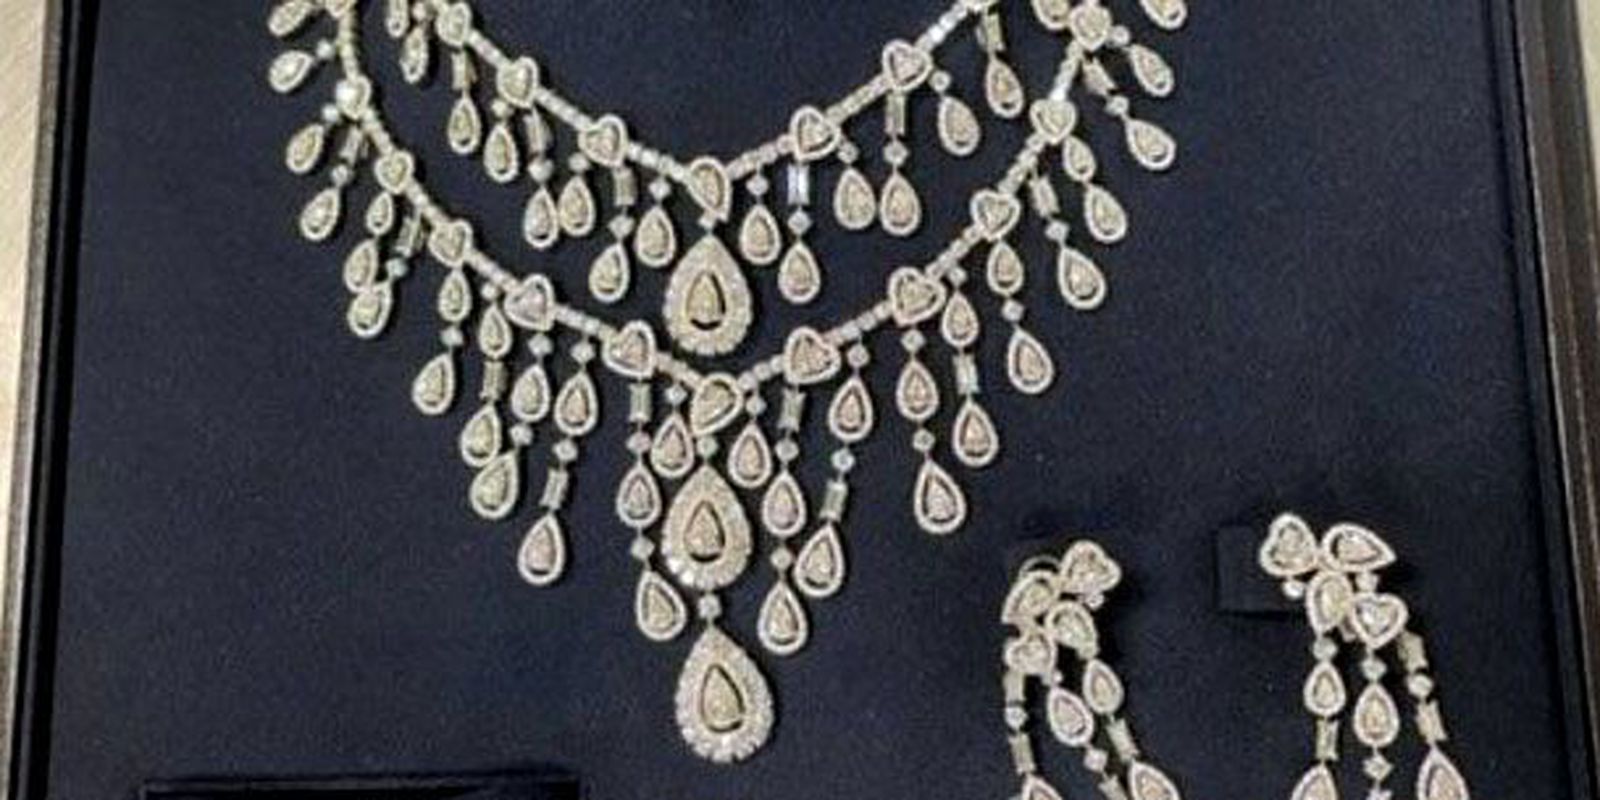 PF will investigate whether there was a crime in the case of jewelry donated by the Arab government